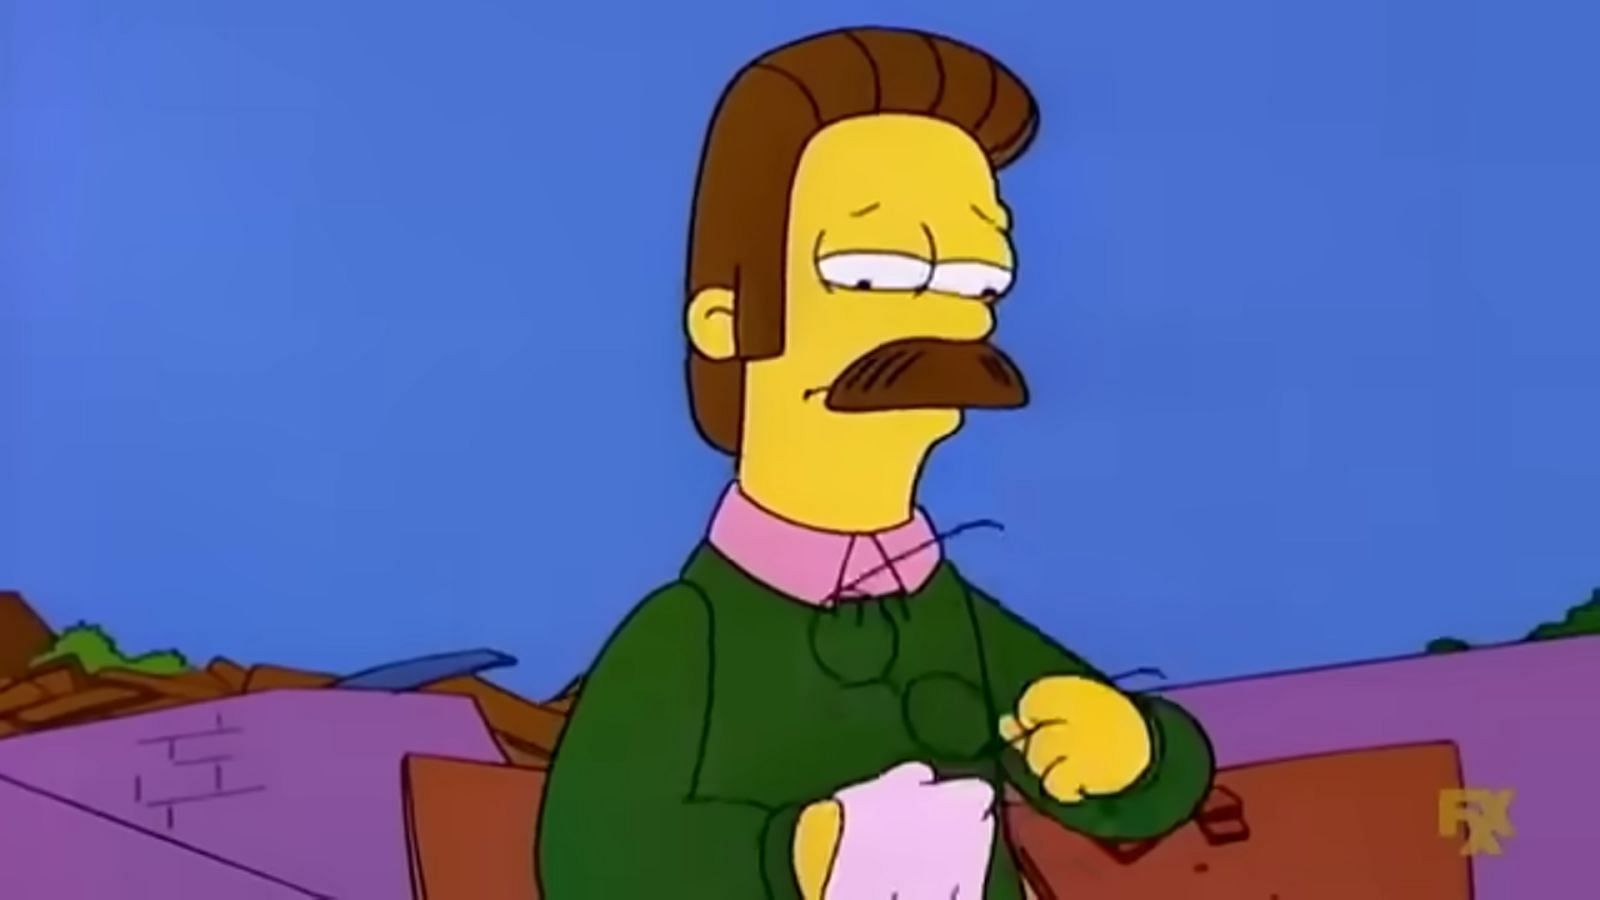 Who is Flanders from the Simpsons?